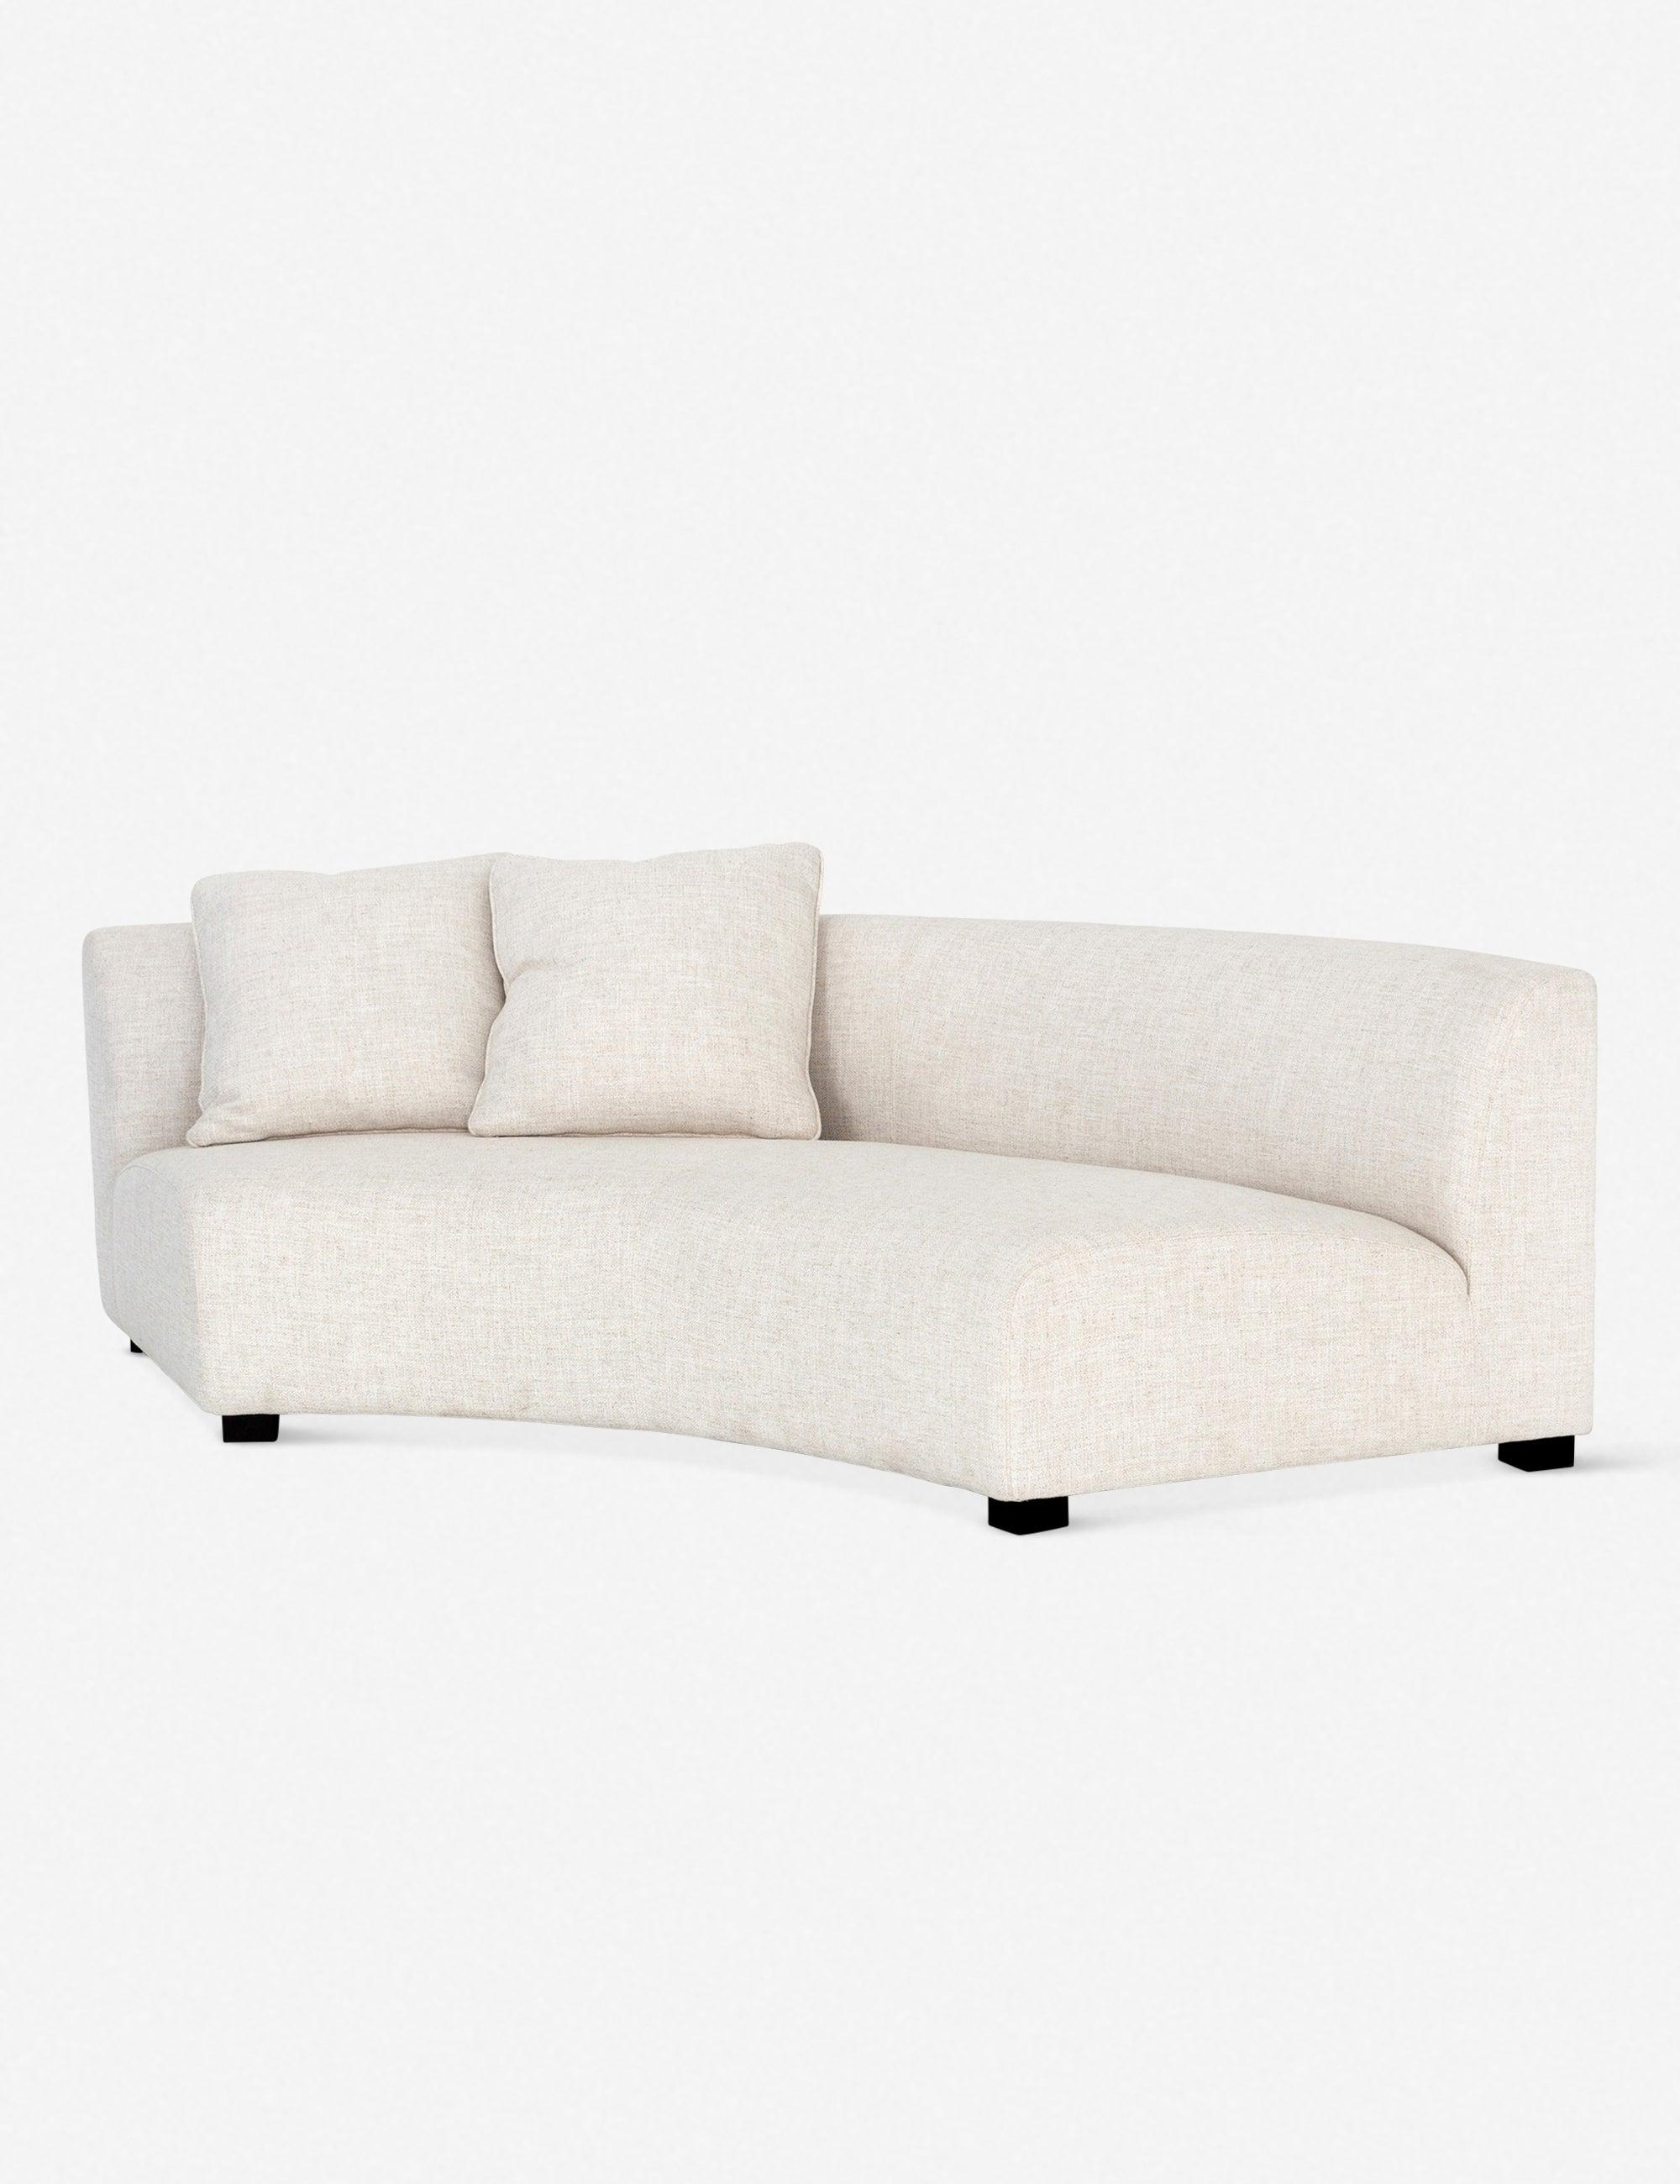 Dover Crescent Tufted Linen Two-Piece Sectional Sofa